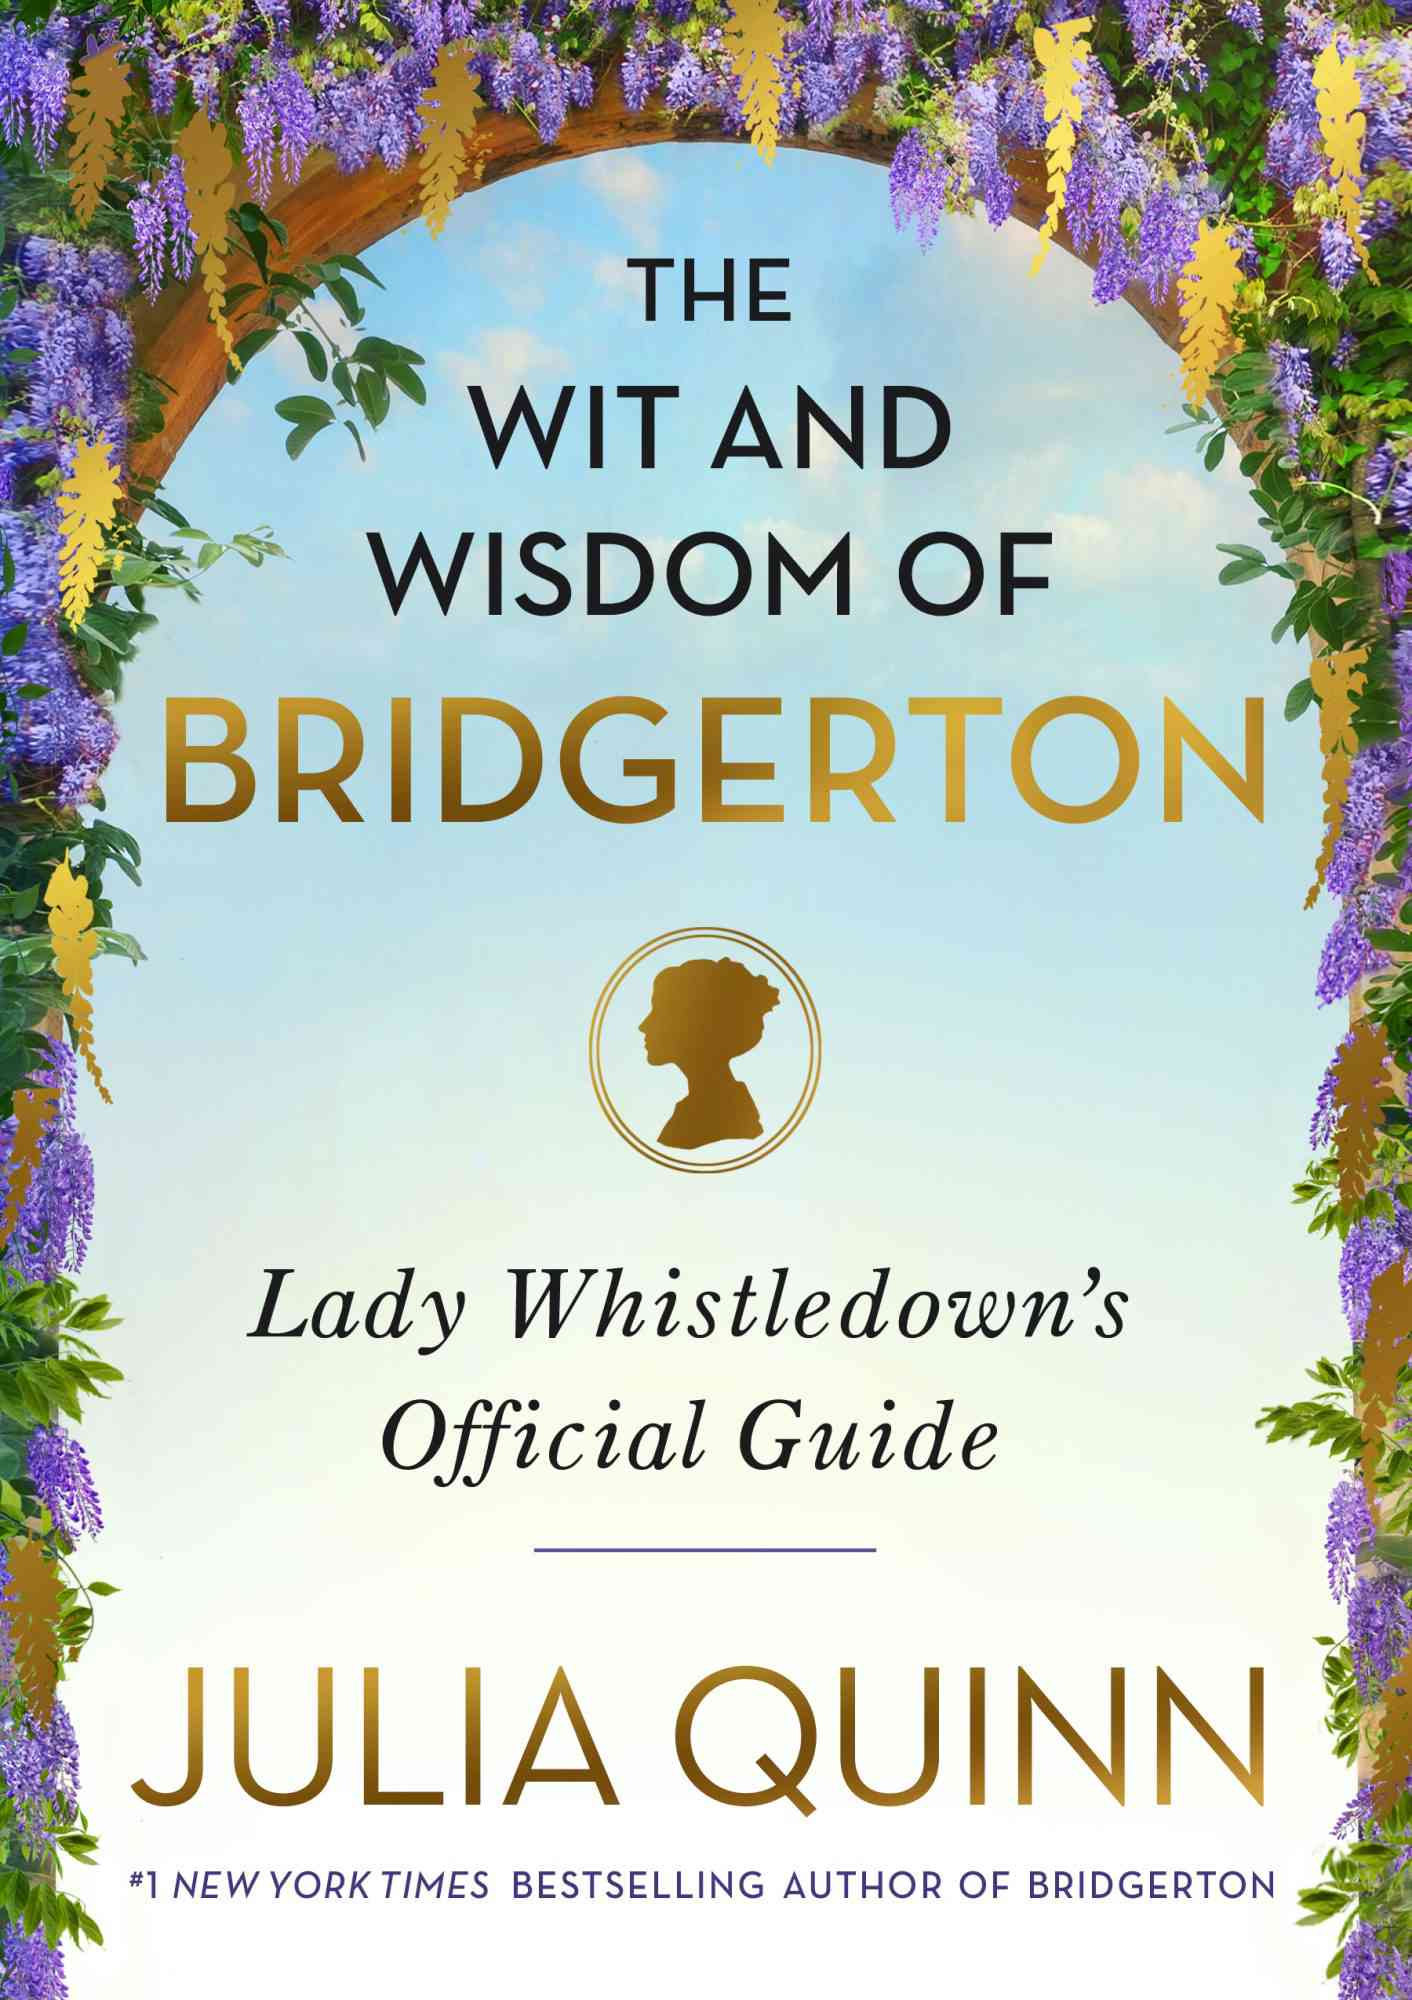 Lady Whistledown Is Back! All About Julia Quinn&#39;s New Bridgerton Book | PEOPLE.com